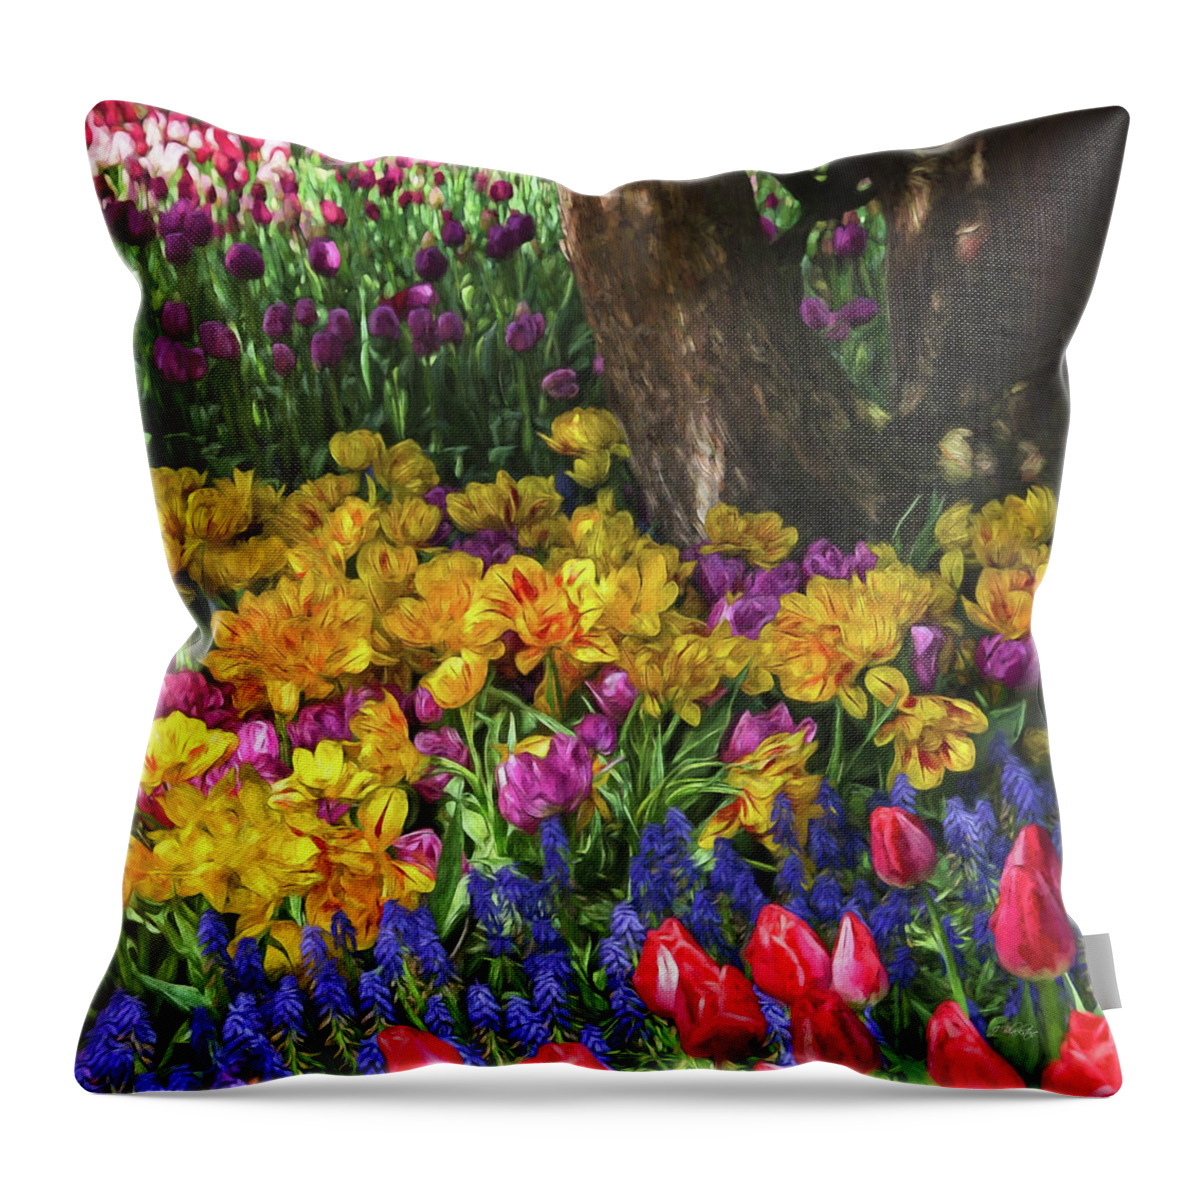 A Brush With Spring Throw Pillow featuring the painting A Brush With Spring - Flower Art by Jordan Blackstone